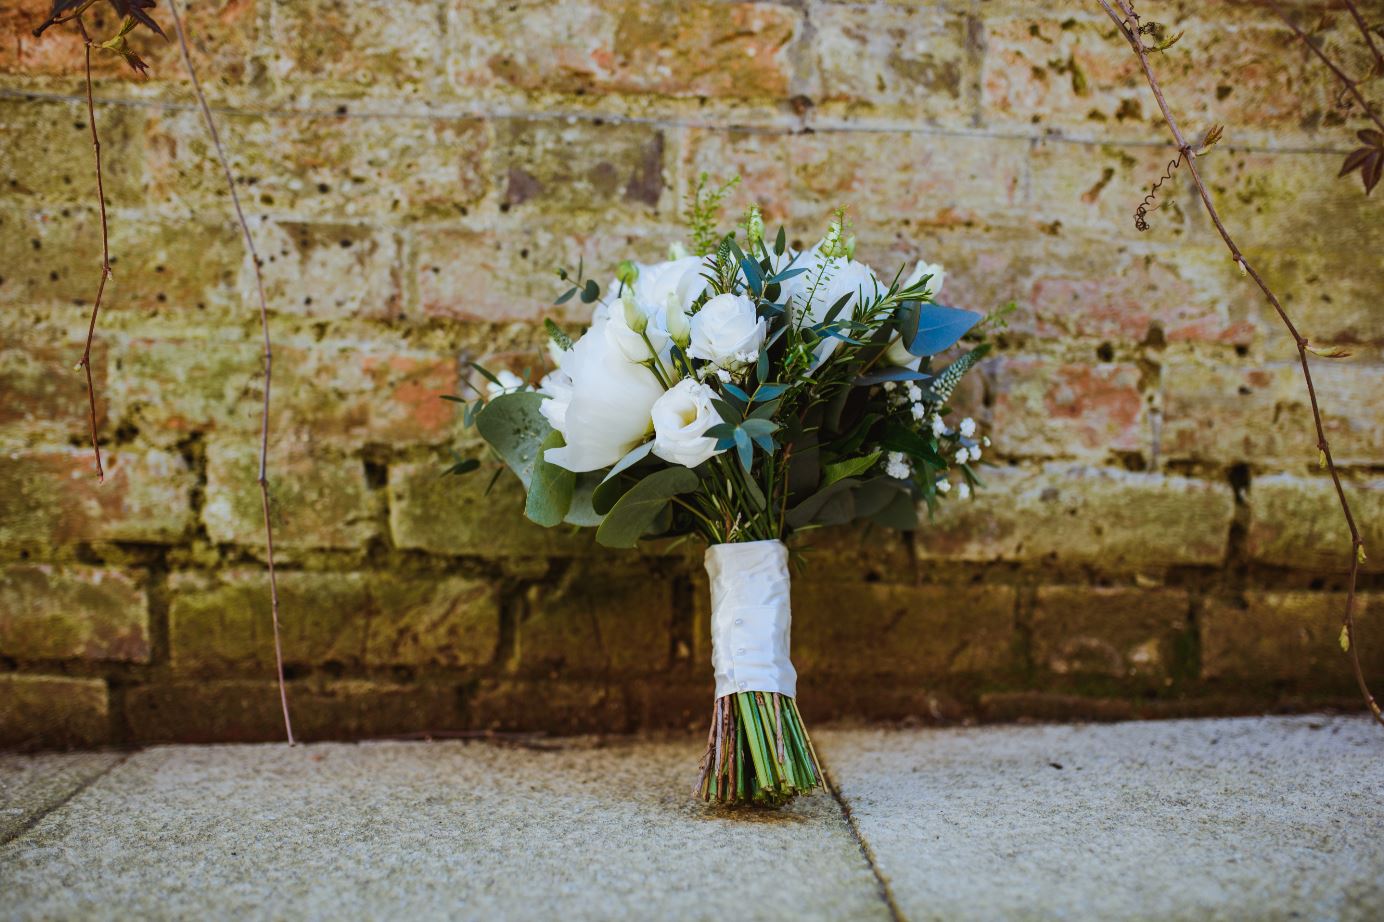 A photo of wedding flowers